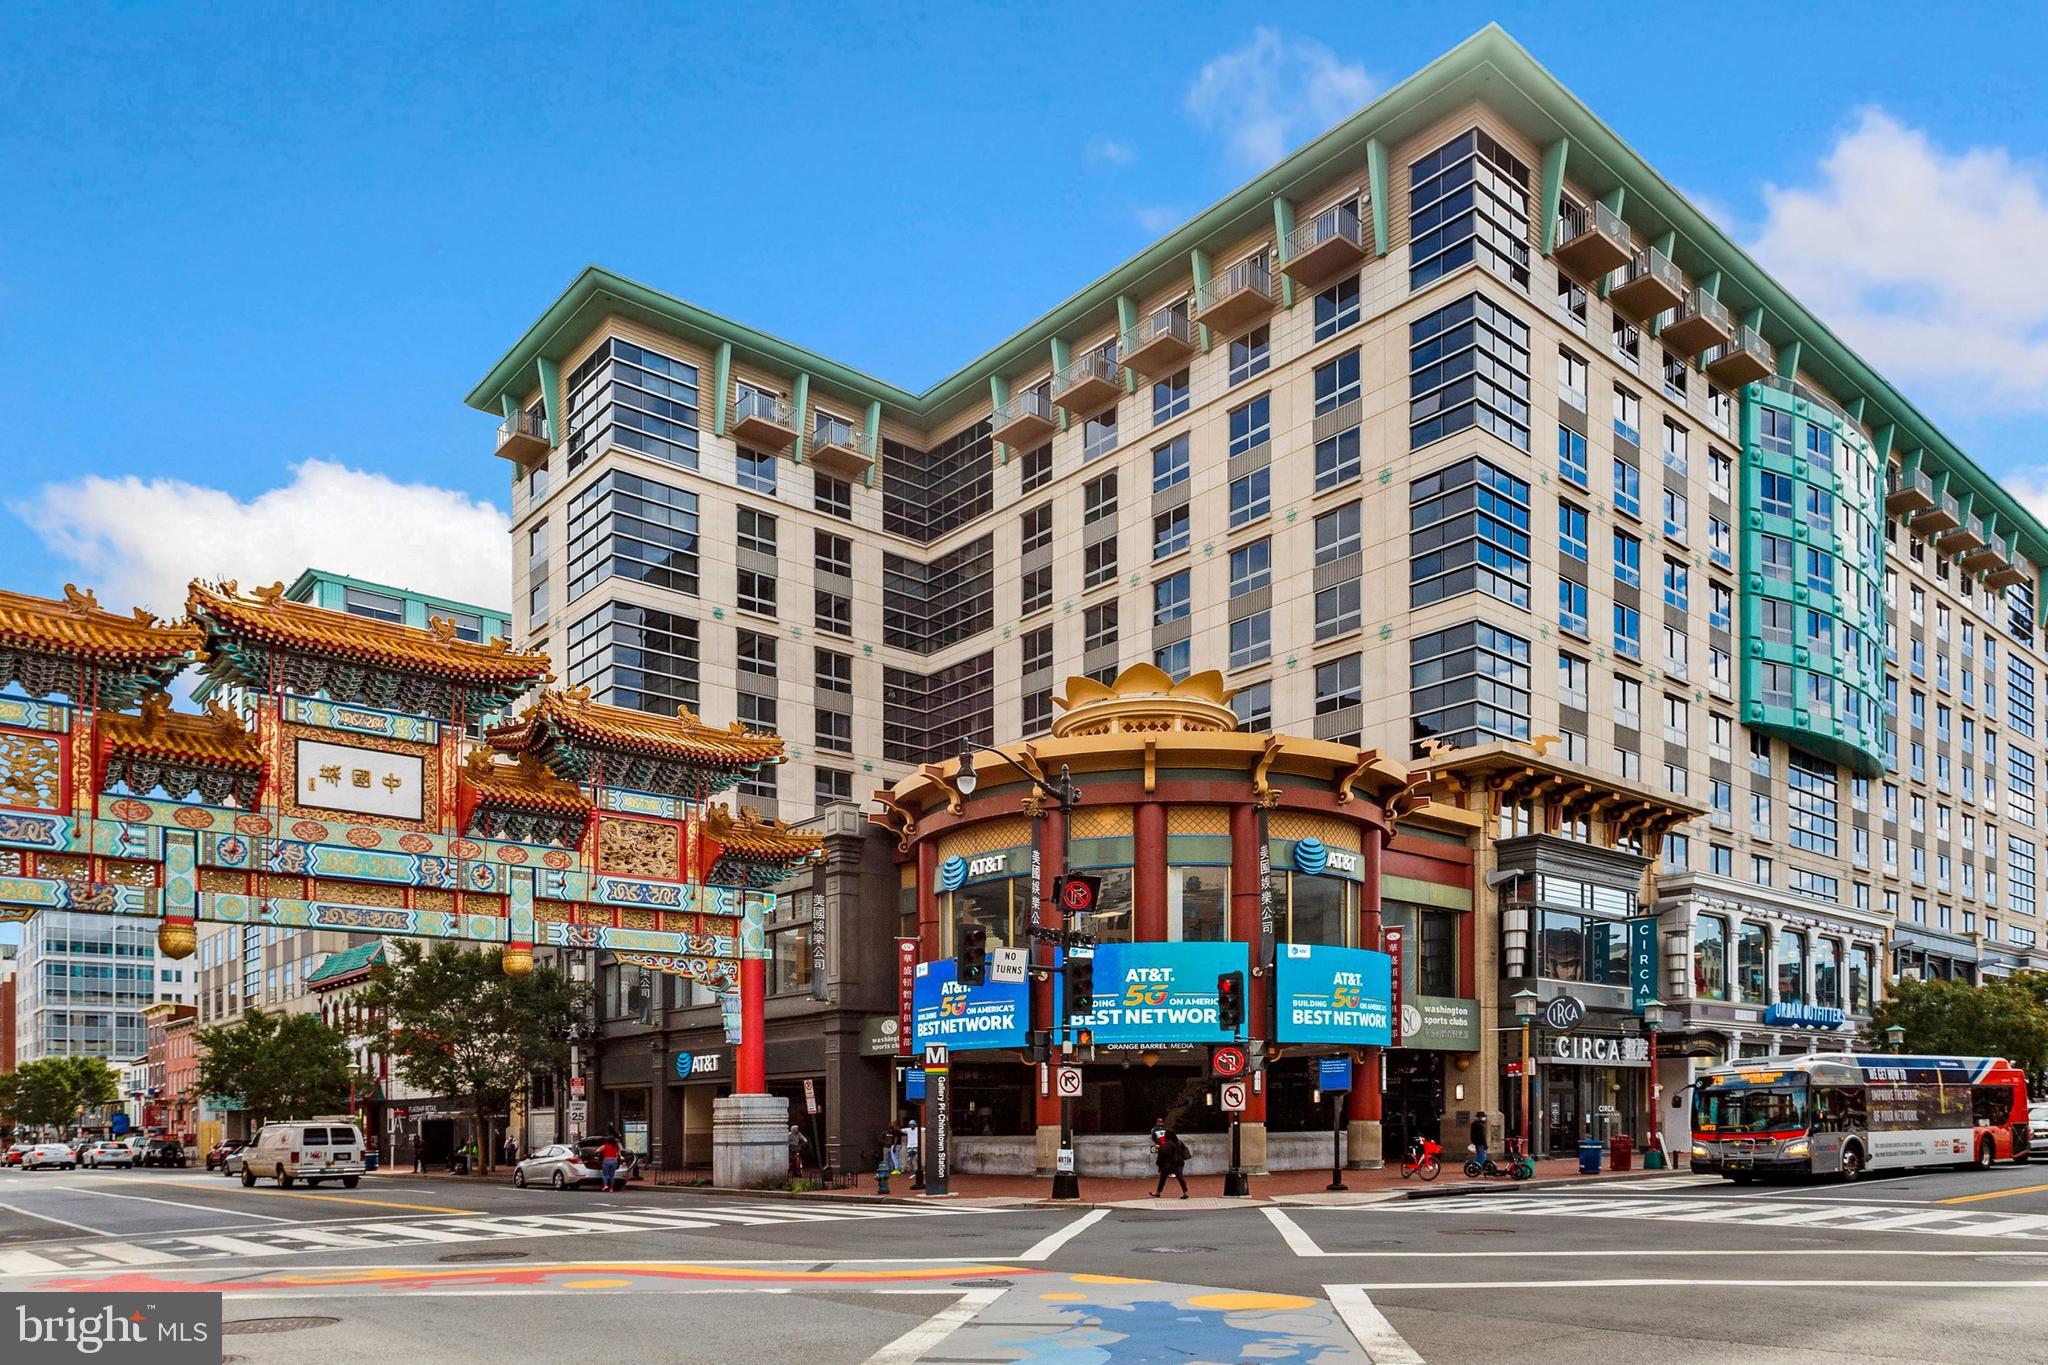 Turnkey condo in the heart of Chinatown with a rare expansive patio, ideal for outdoor entertaining.